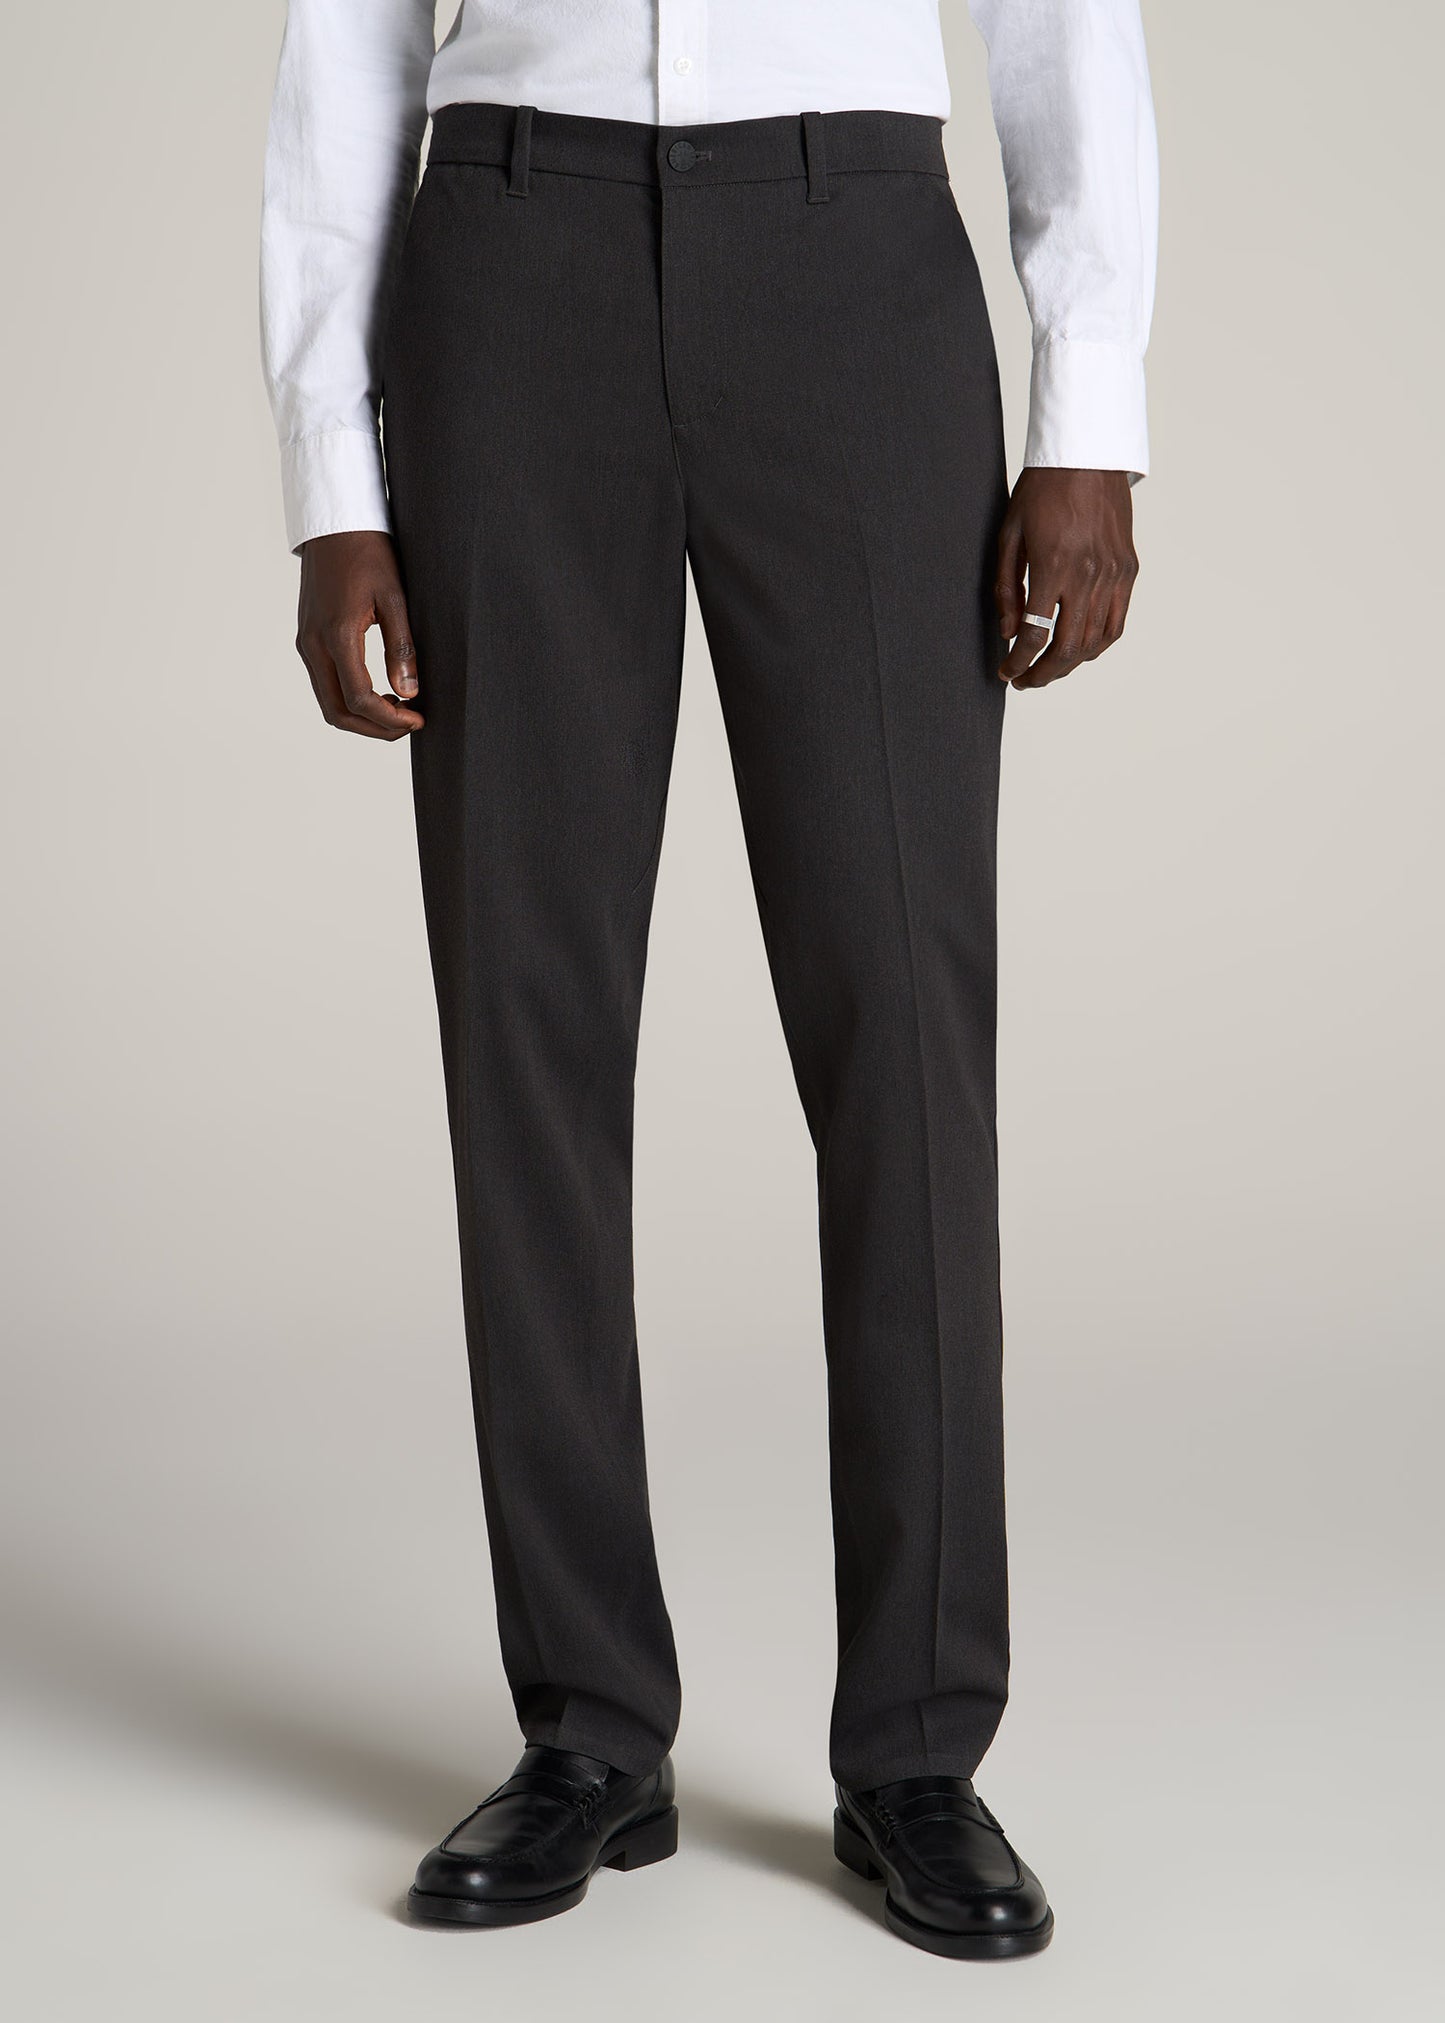 Ladies Flex Fit Waist Dress Pant with Tailored Front